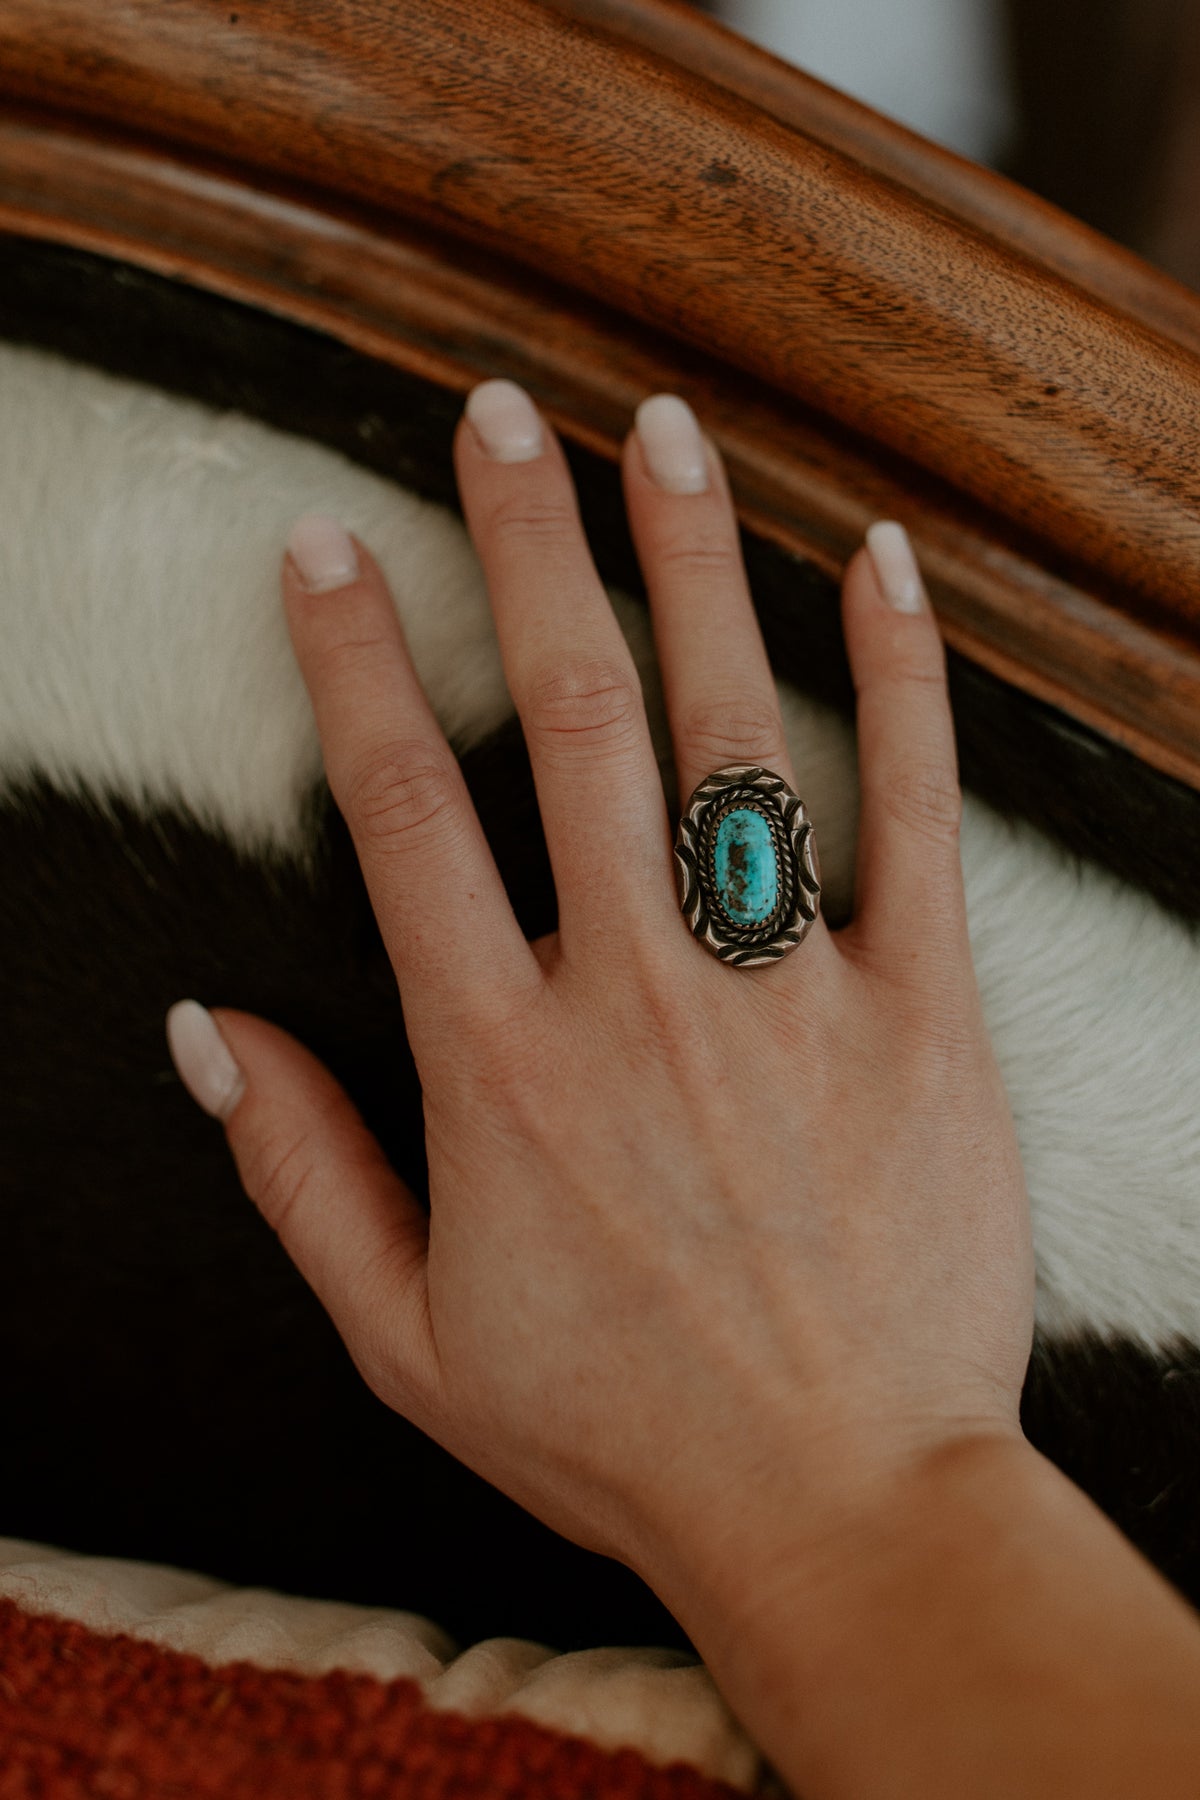 Vintage Turquoise Ring - Size 5.25